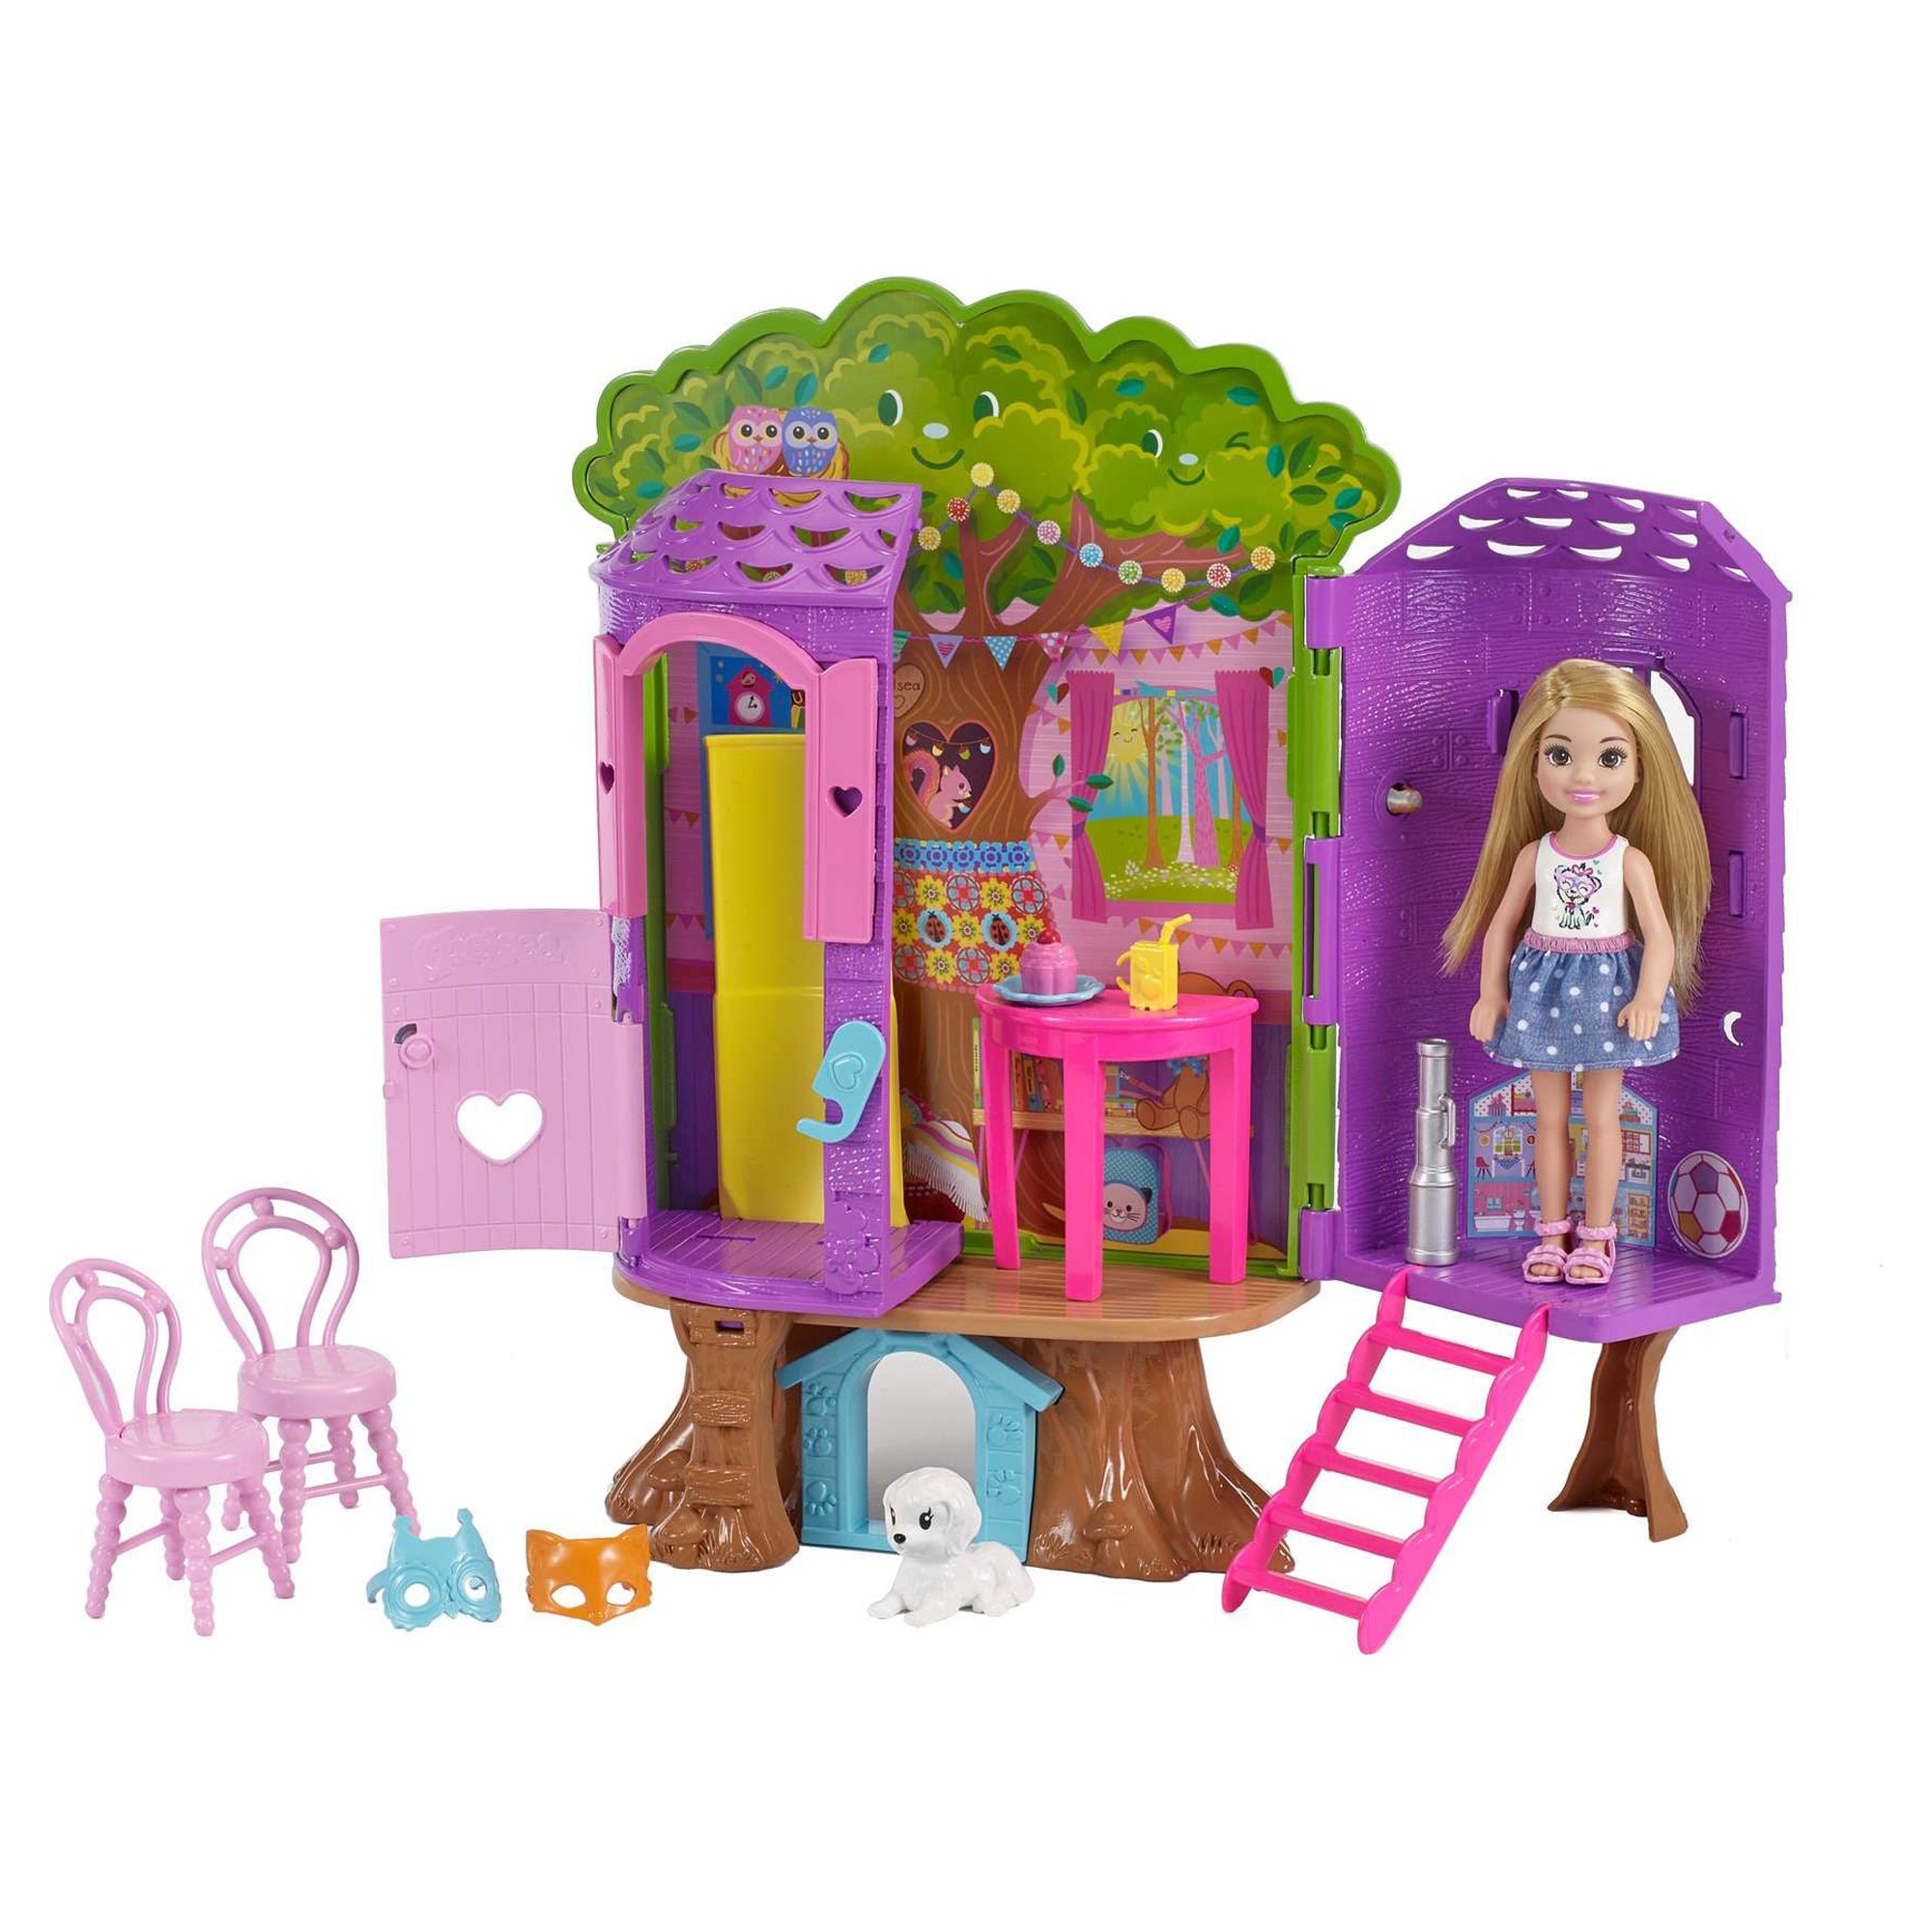 Barbie Club Chelsea Treehouse Dollhouse Playset with Accessories - image 5 of 10